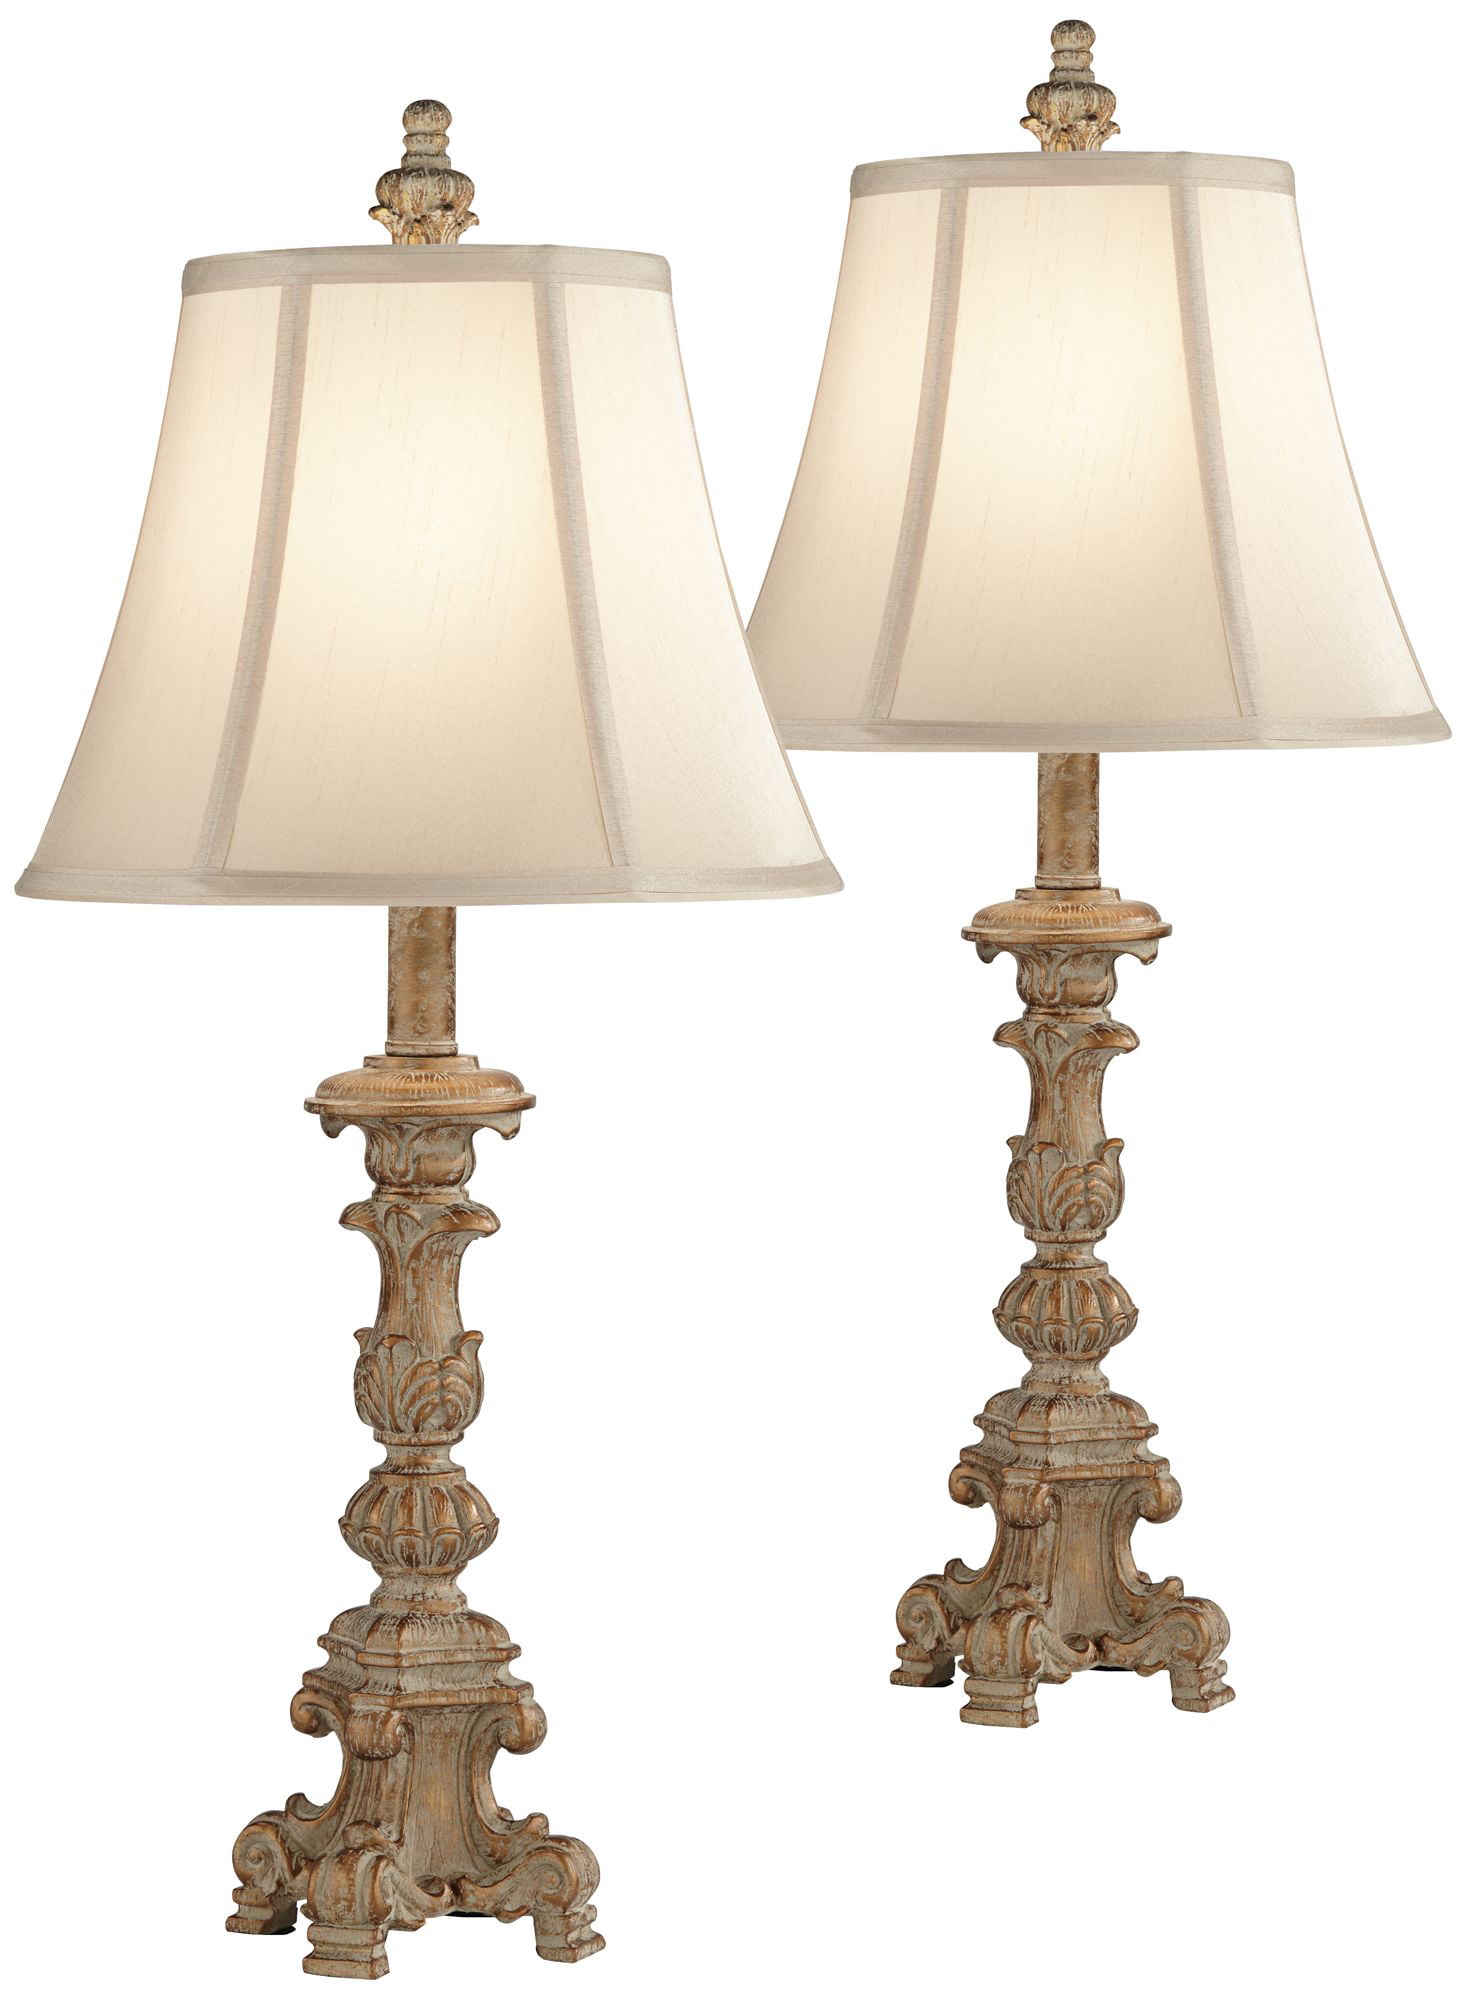 Regency Hill Shabby Chic Table Lamps, Best Shade For Candlestick Lamp